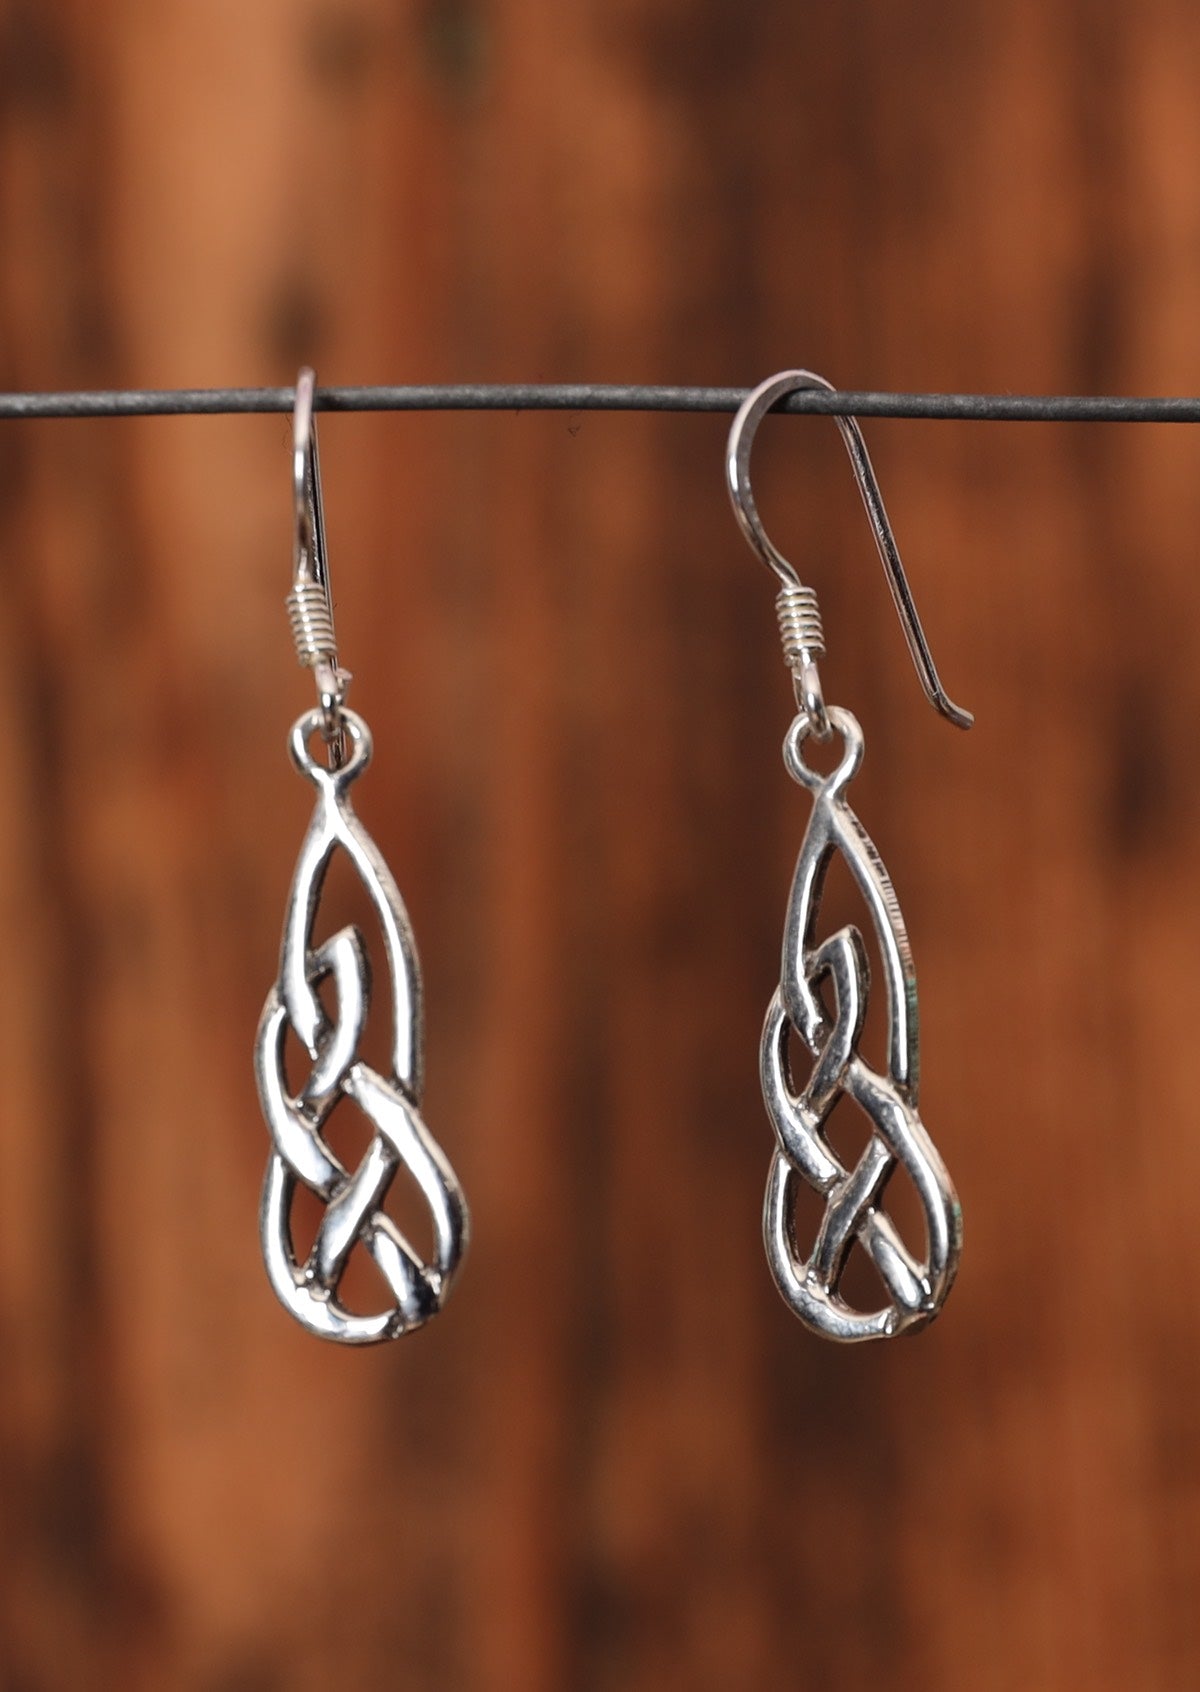 92.5% silver woven Celtic droplet earrings sitting on a wire for display.